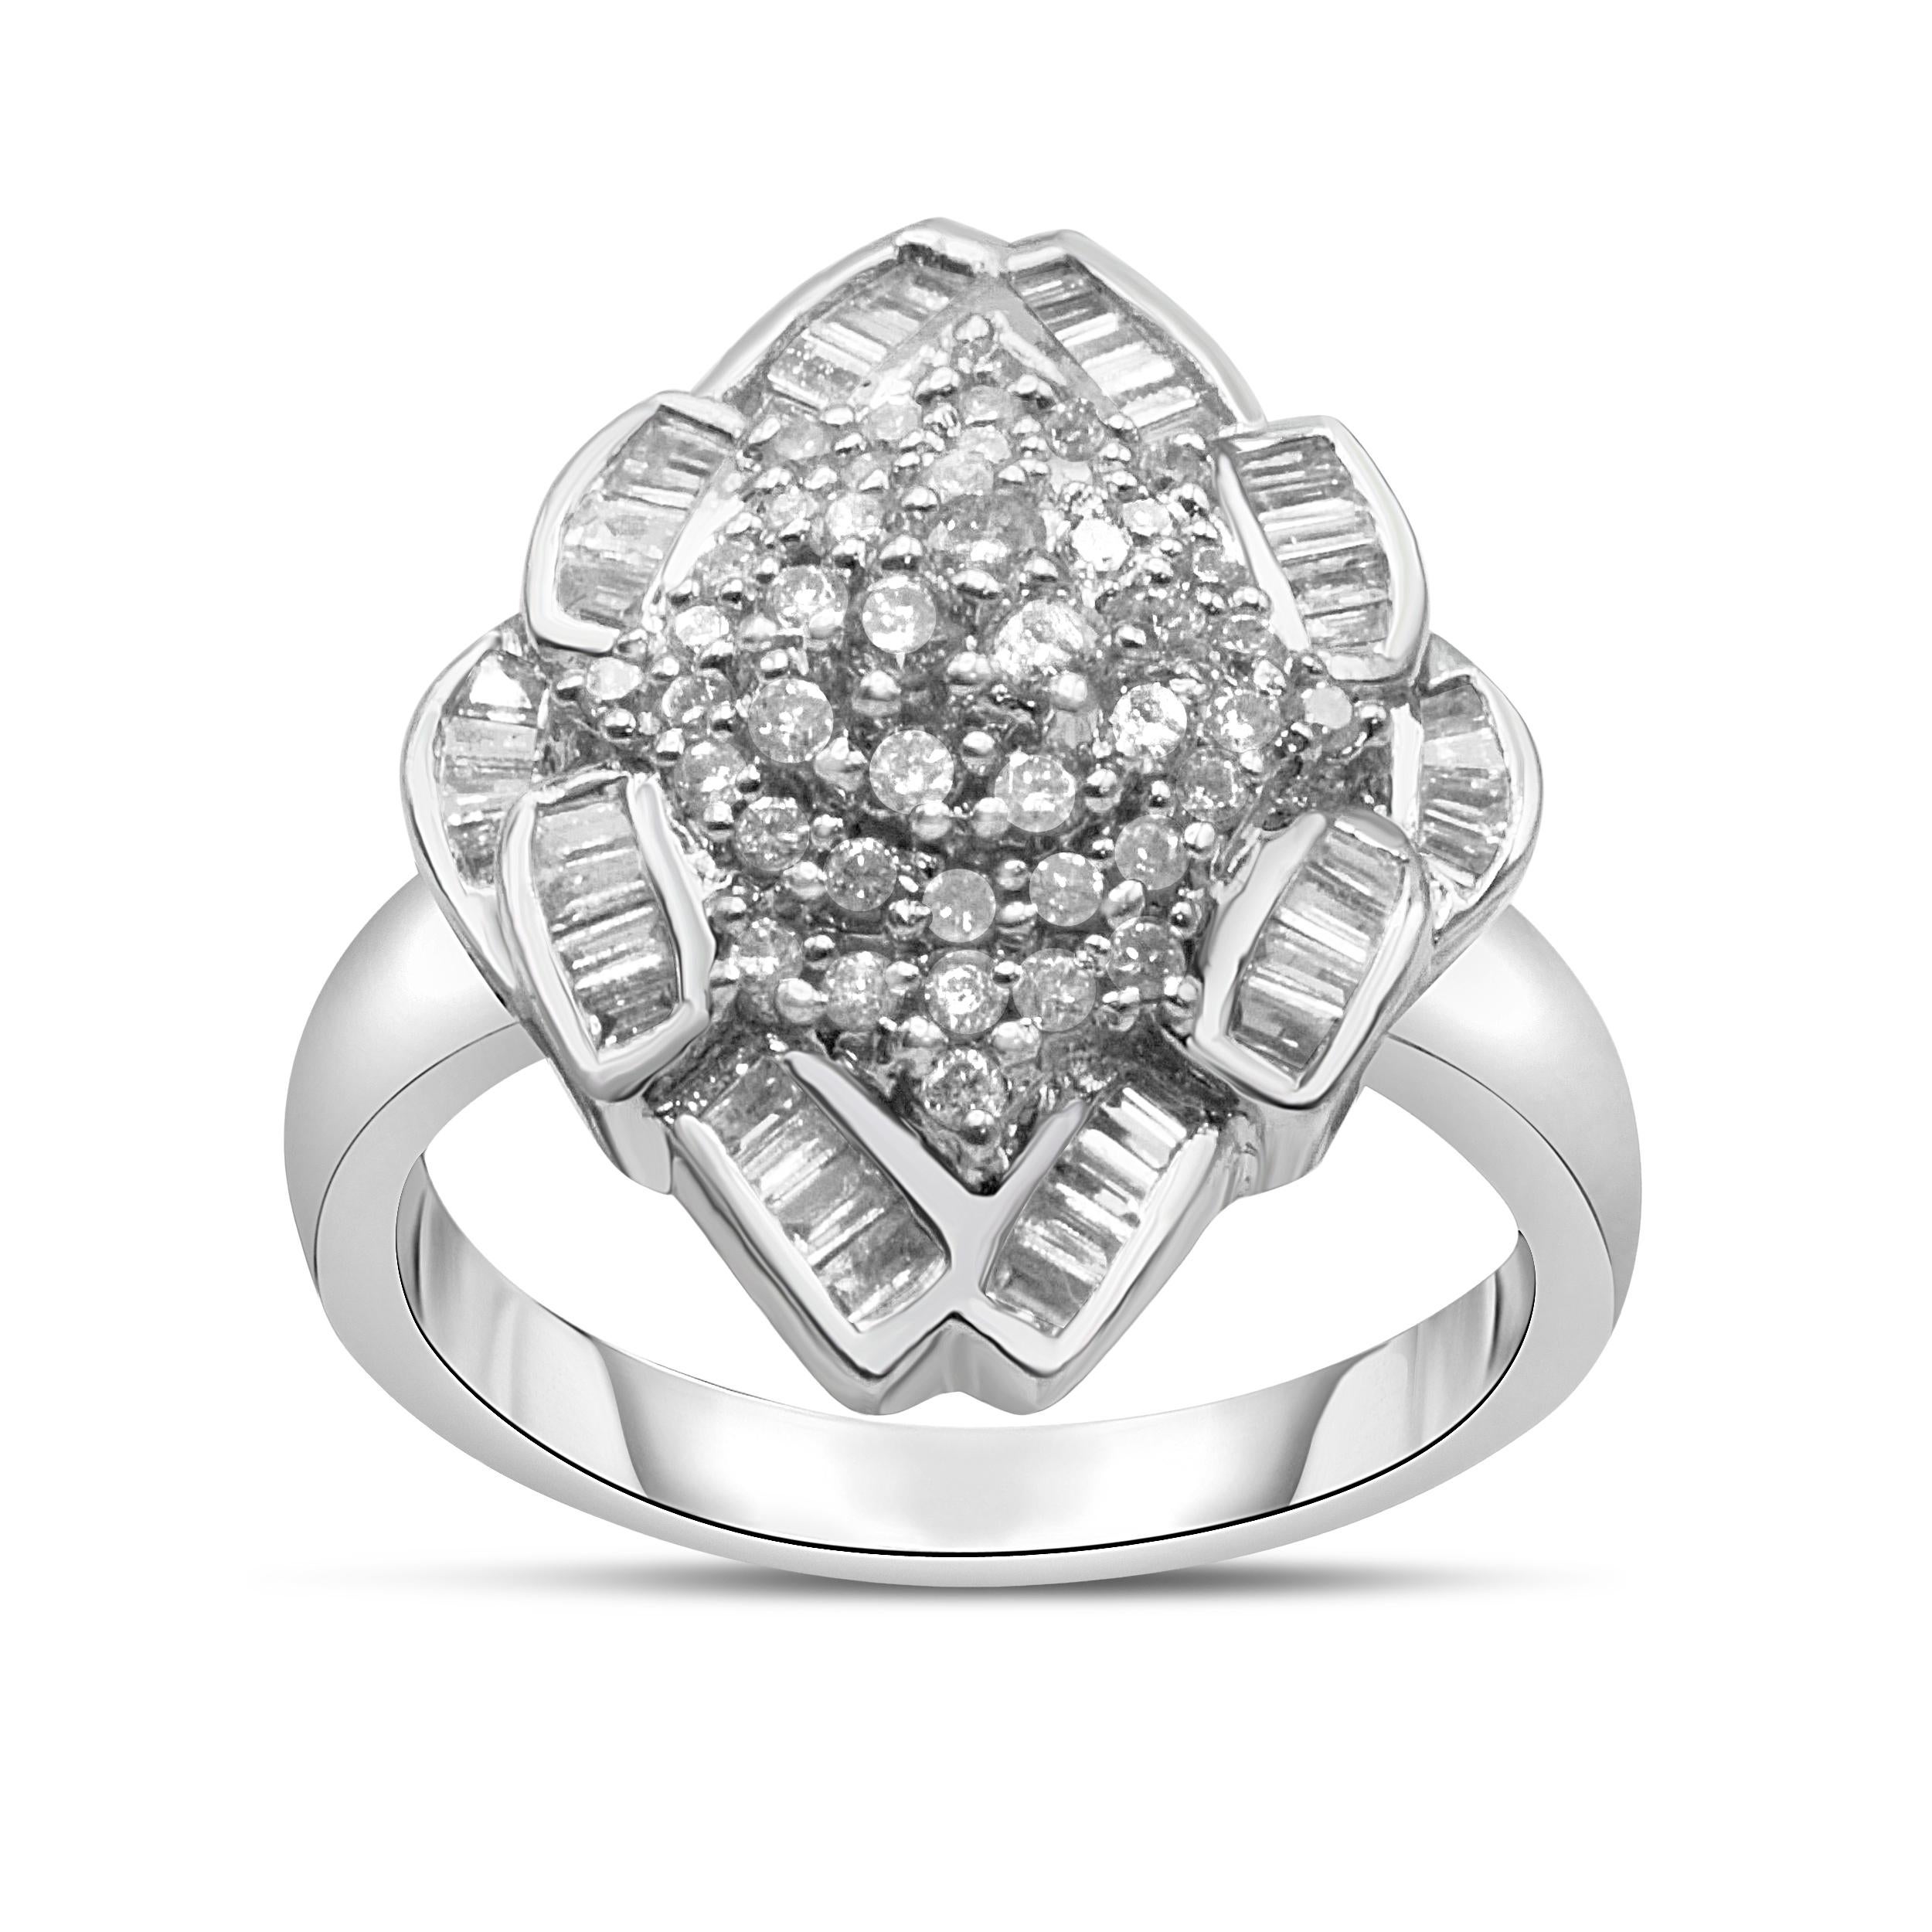 This stunning 14k white gold cocktail ring is inlaid with 7/8 carats of beautiful, natural diamonds. The central cluster of this ring is composed of glimmering round-cut diamonds in an elegant prong setting. Flanked on each side in a floral design